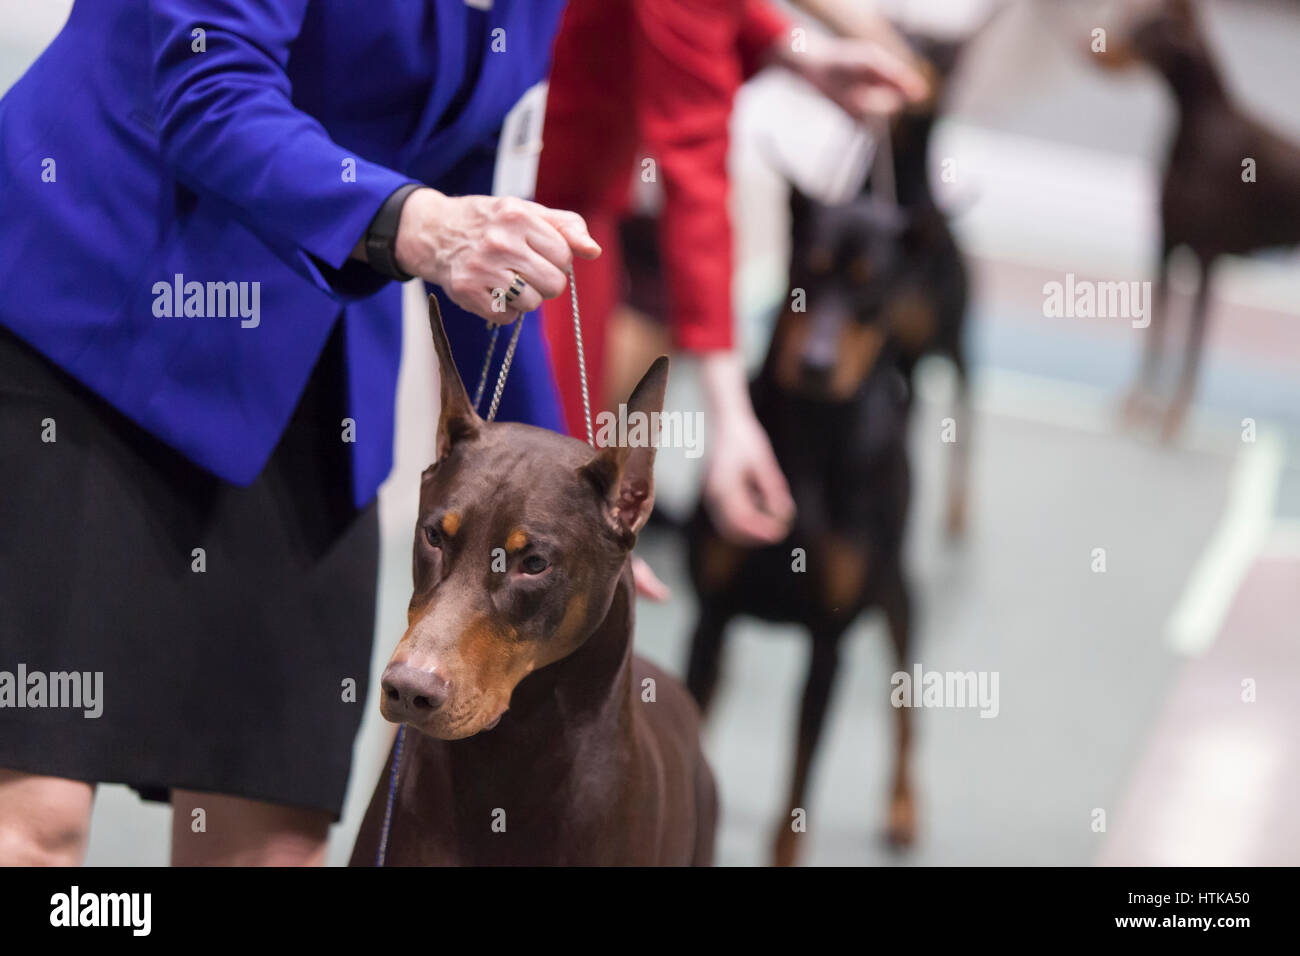 Seattle, Washington DC, USA. 11th March 2017. Doberman Pinschers in the ring at the 2017 Seattle Kennel Club Dog Show. Approximately 160 different breeds participate in the annual All-Breed dog show at CenturyLink Field Event Center. Credit: Paul Gordon/Alamy Live News Stock Photo